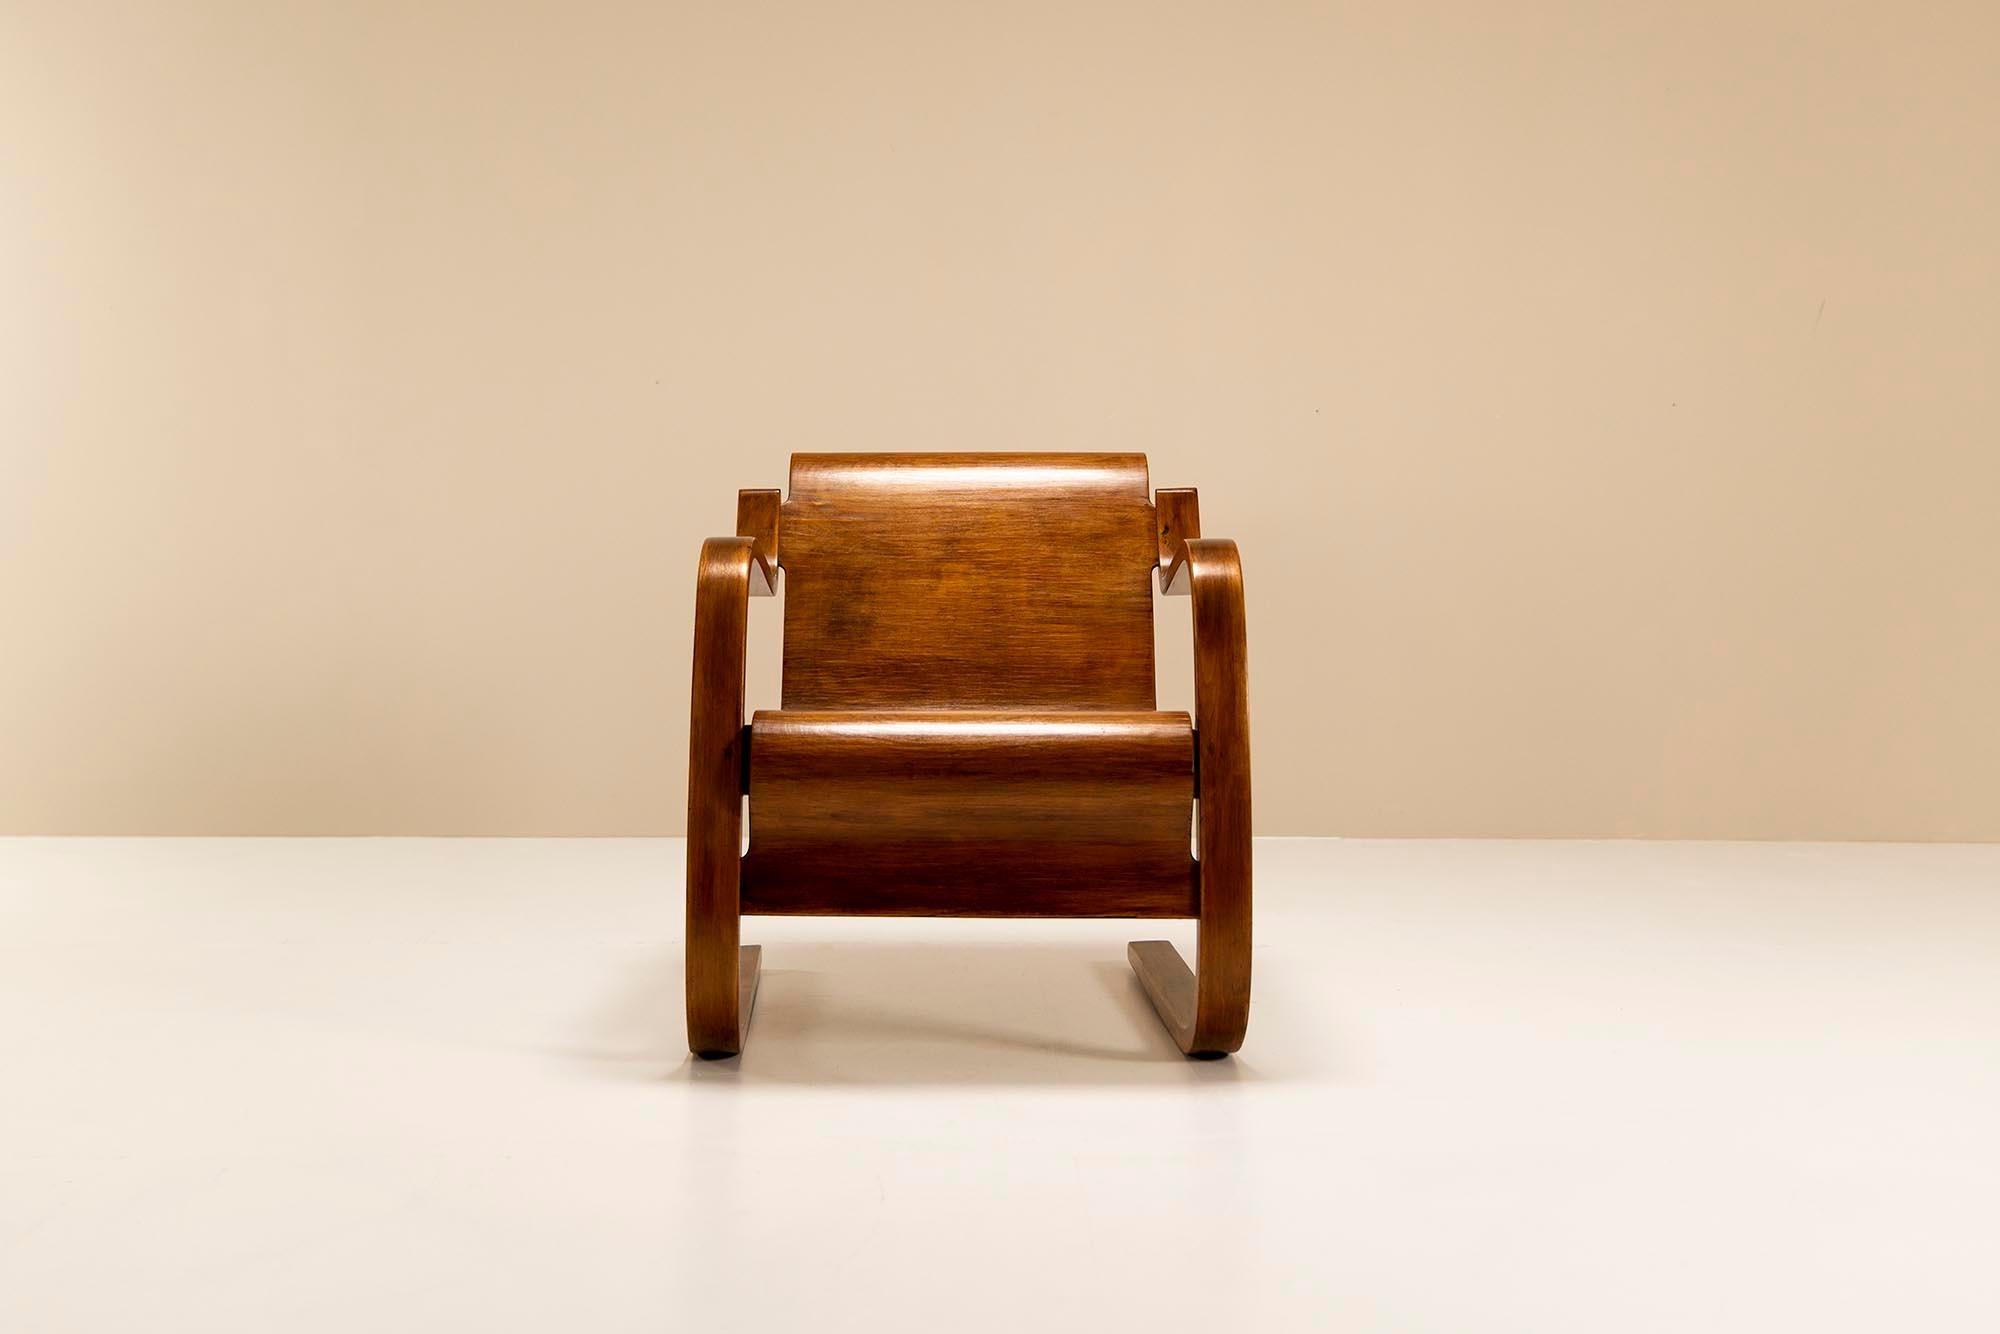 Alvar Aalto lounge chair Model 31/41, 1935 Finland. This cantilever chair is made of shaped birch plywood and stained dark. It has a stamp with illegible numbers underneath. This chair is designed for the Paimio Sanatorium. In total, we have two